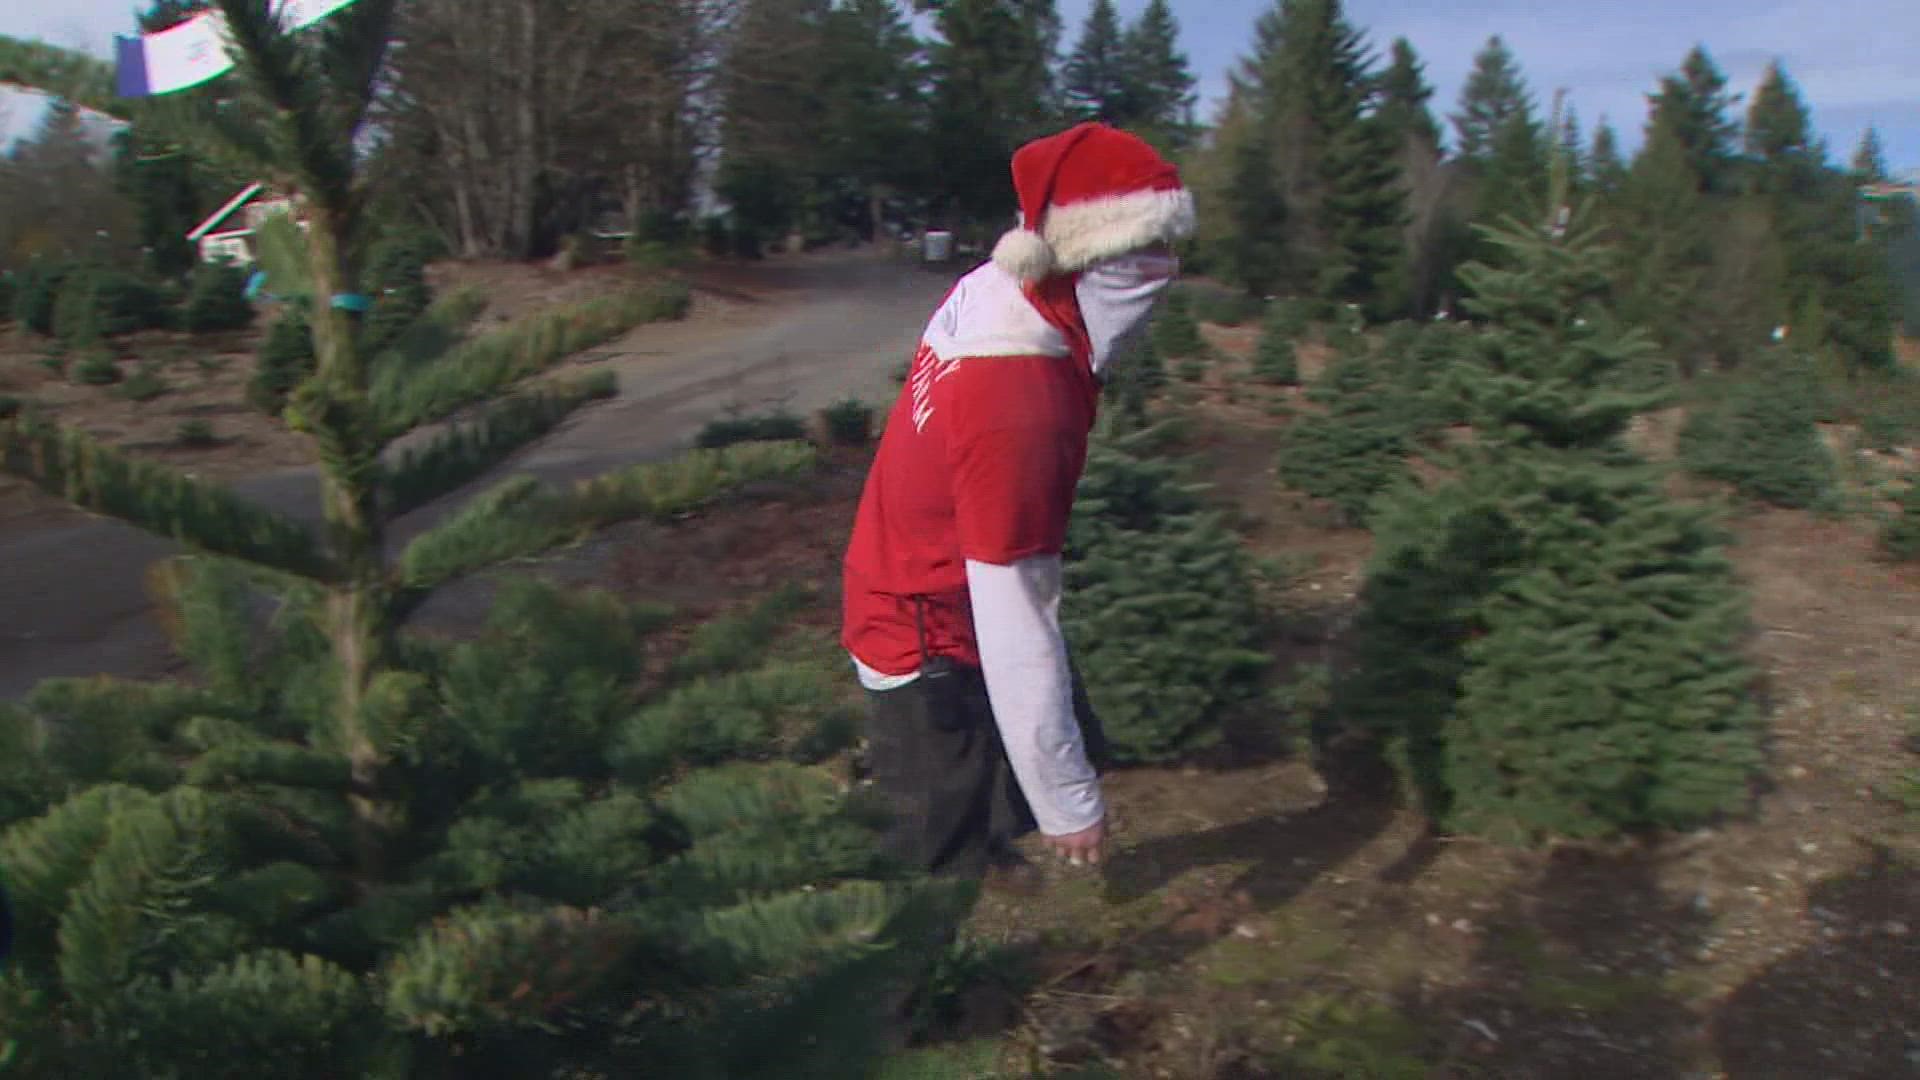 Last summer's heat wave is coming back to haunt us as Christmas tree shoppers discover how some farms were impacted.